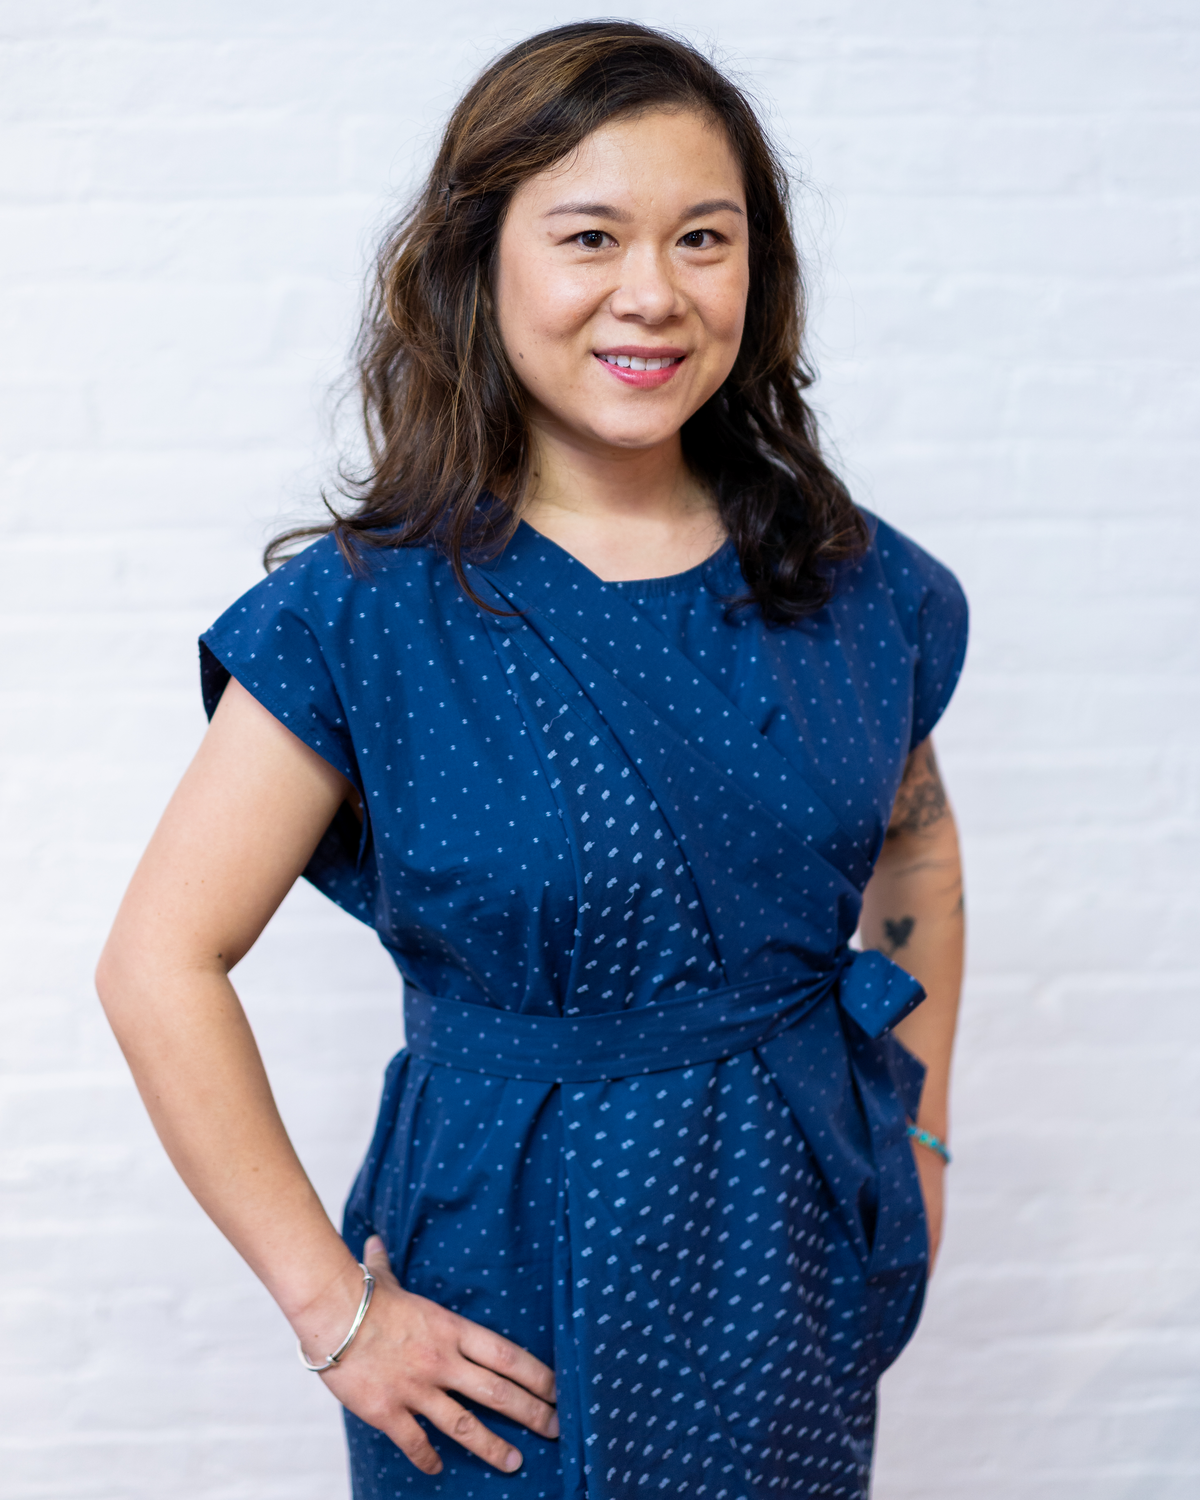 Image of an Asian-American woman in a navy blue dress standing in front of a white brick wall